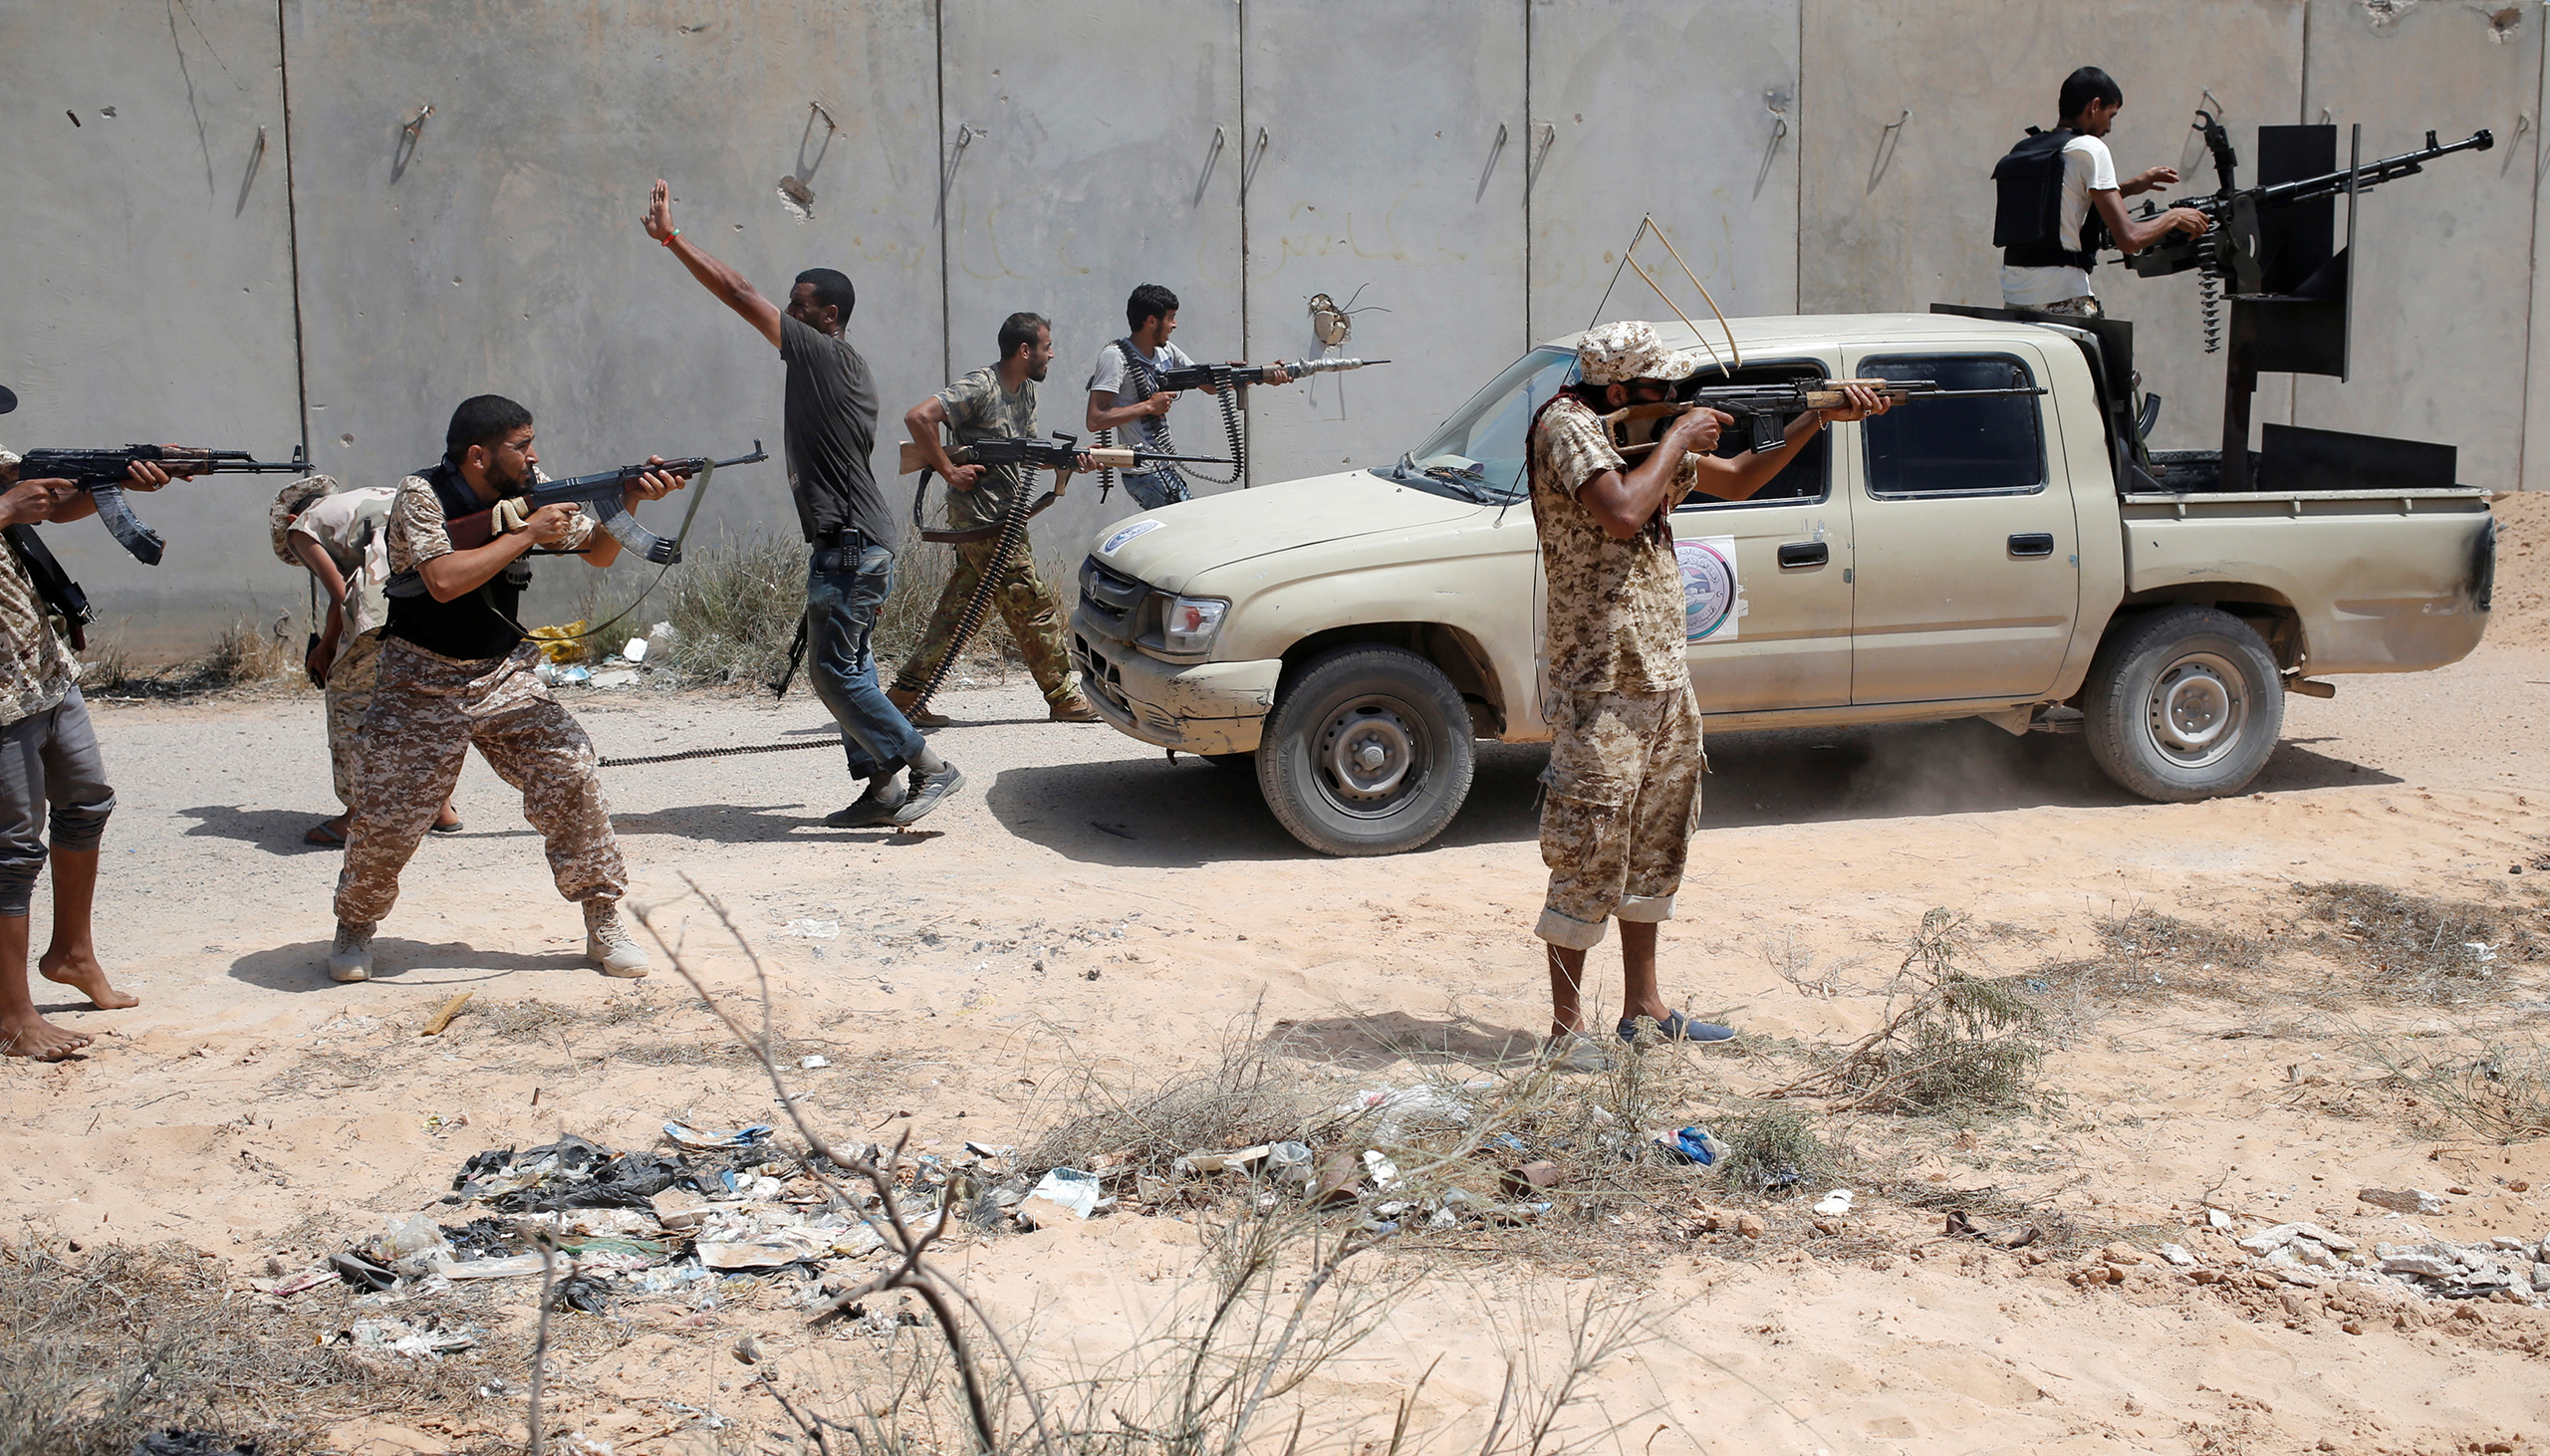 Fighters of the Libyan forces allied with the U.N.-backed unity government fire weapons at ISIS fighters during a battle in Sirt, Libya, on July 31, 2016.